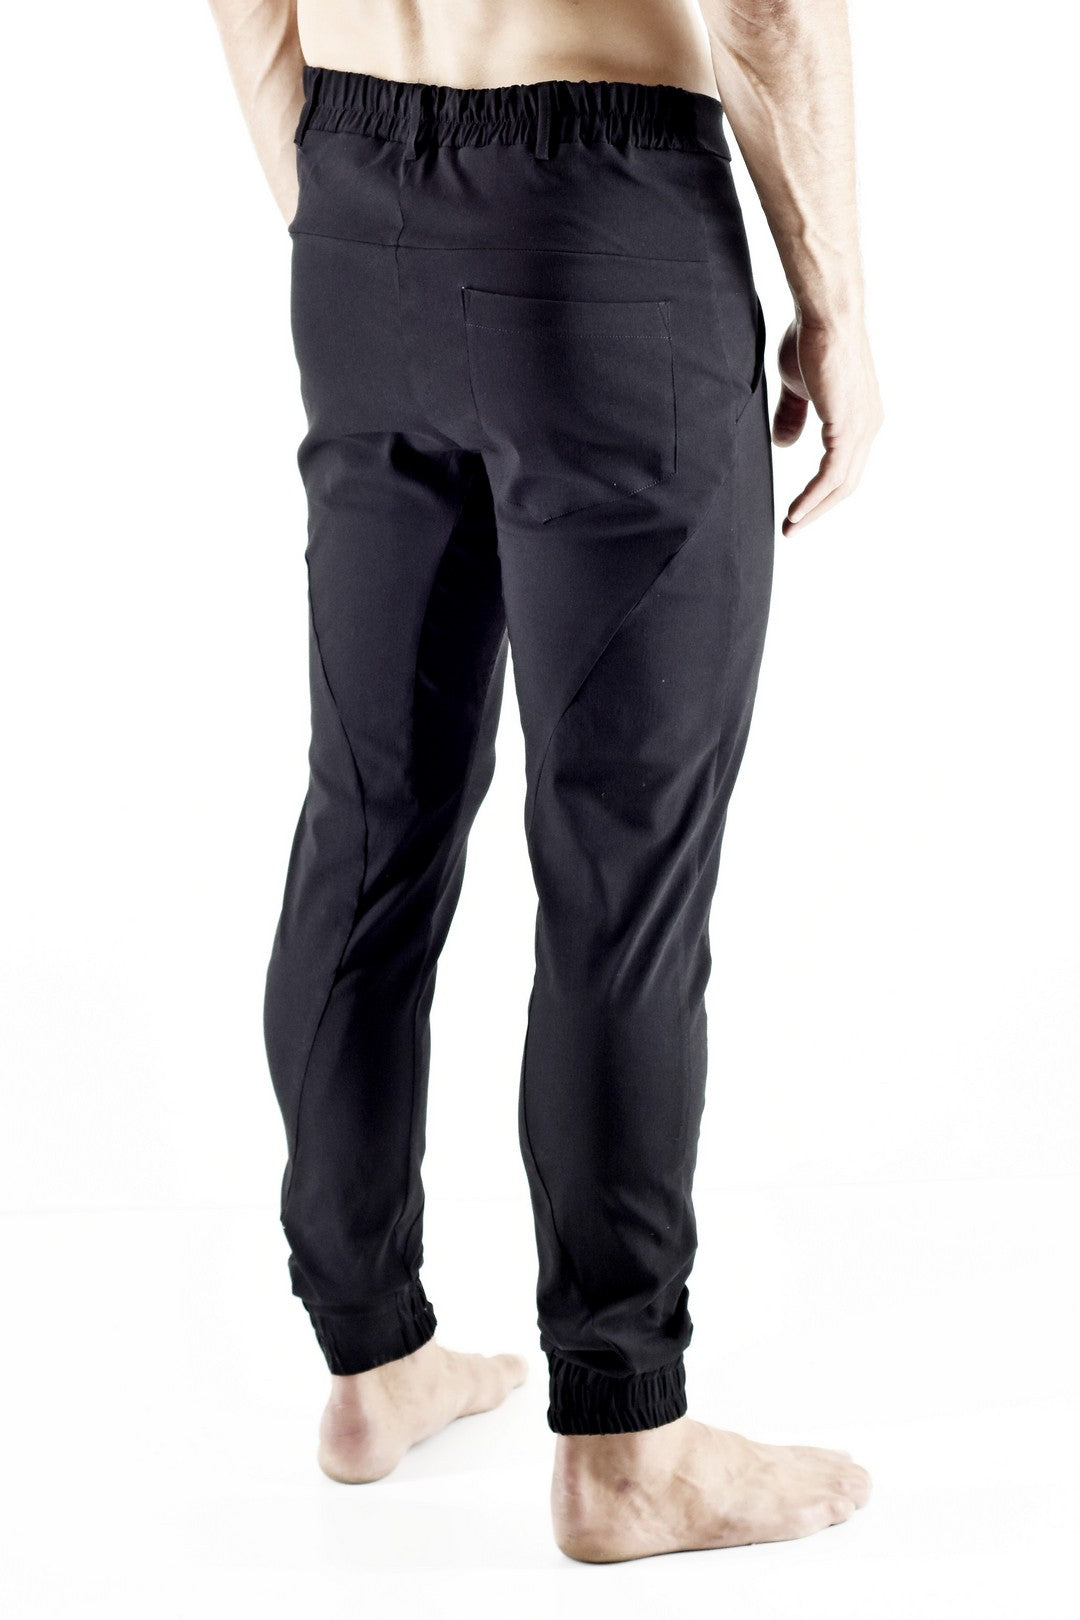 Mens Pants Black with Pocket Detail and Elasticated Cuff ZG5175